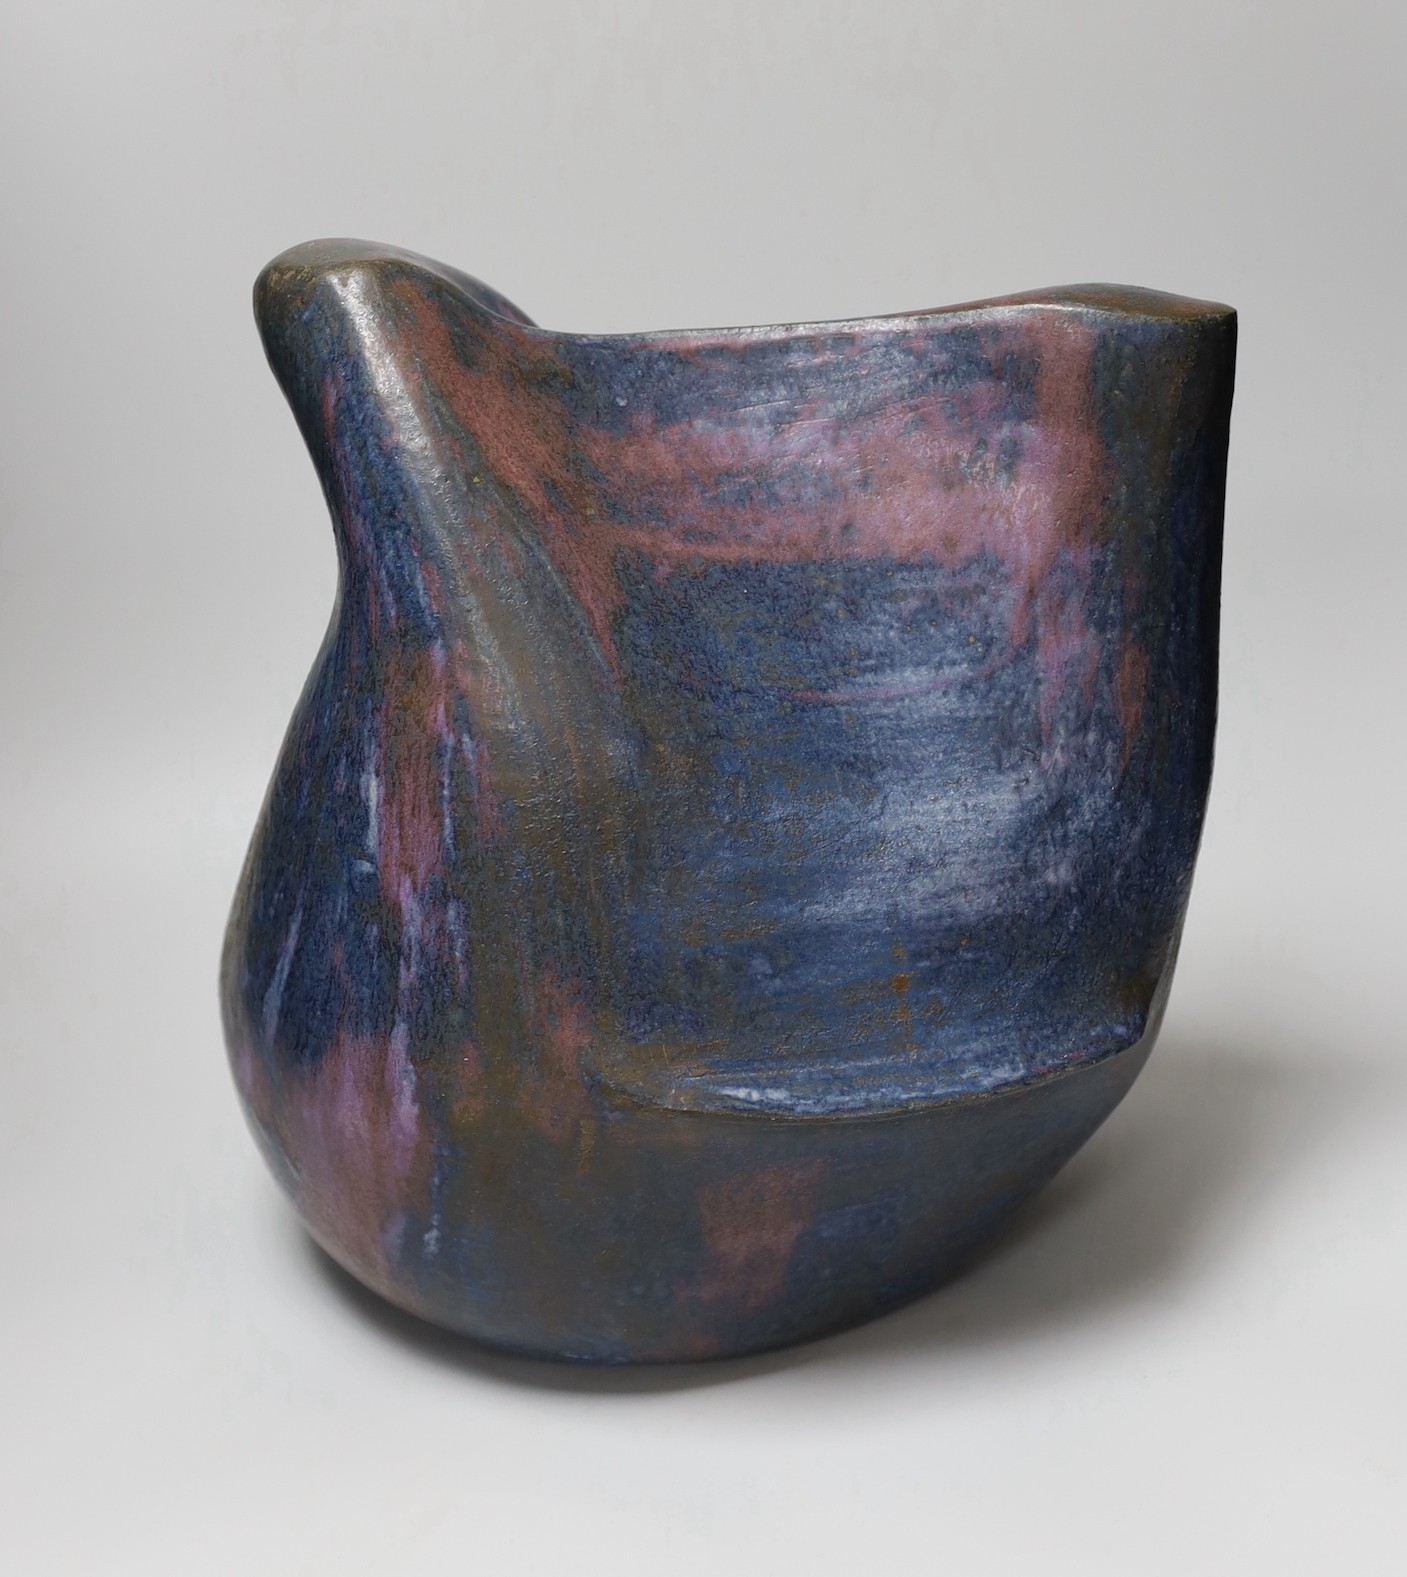 Ruth Sulke - a large studio purple and indigo nickel oxide glazed stoneware bulbous sculpture with flowing lines and hollows, 1985, 34cm, See Sulke, Ruth - Ceramic Sculpture by Ruth Sulke, Hanart 2 Gallery, 1987, page 24